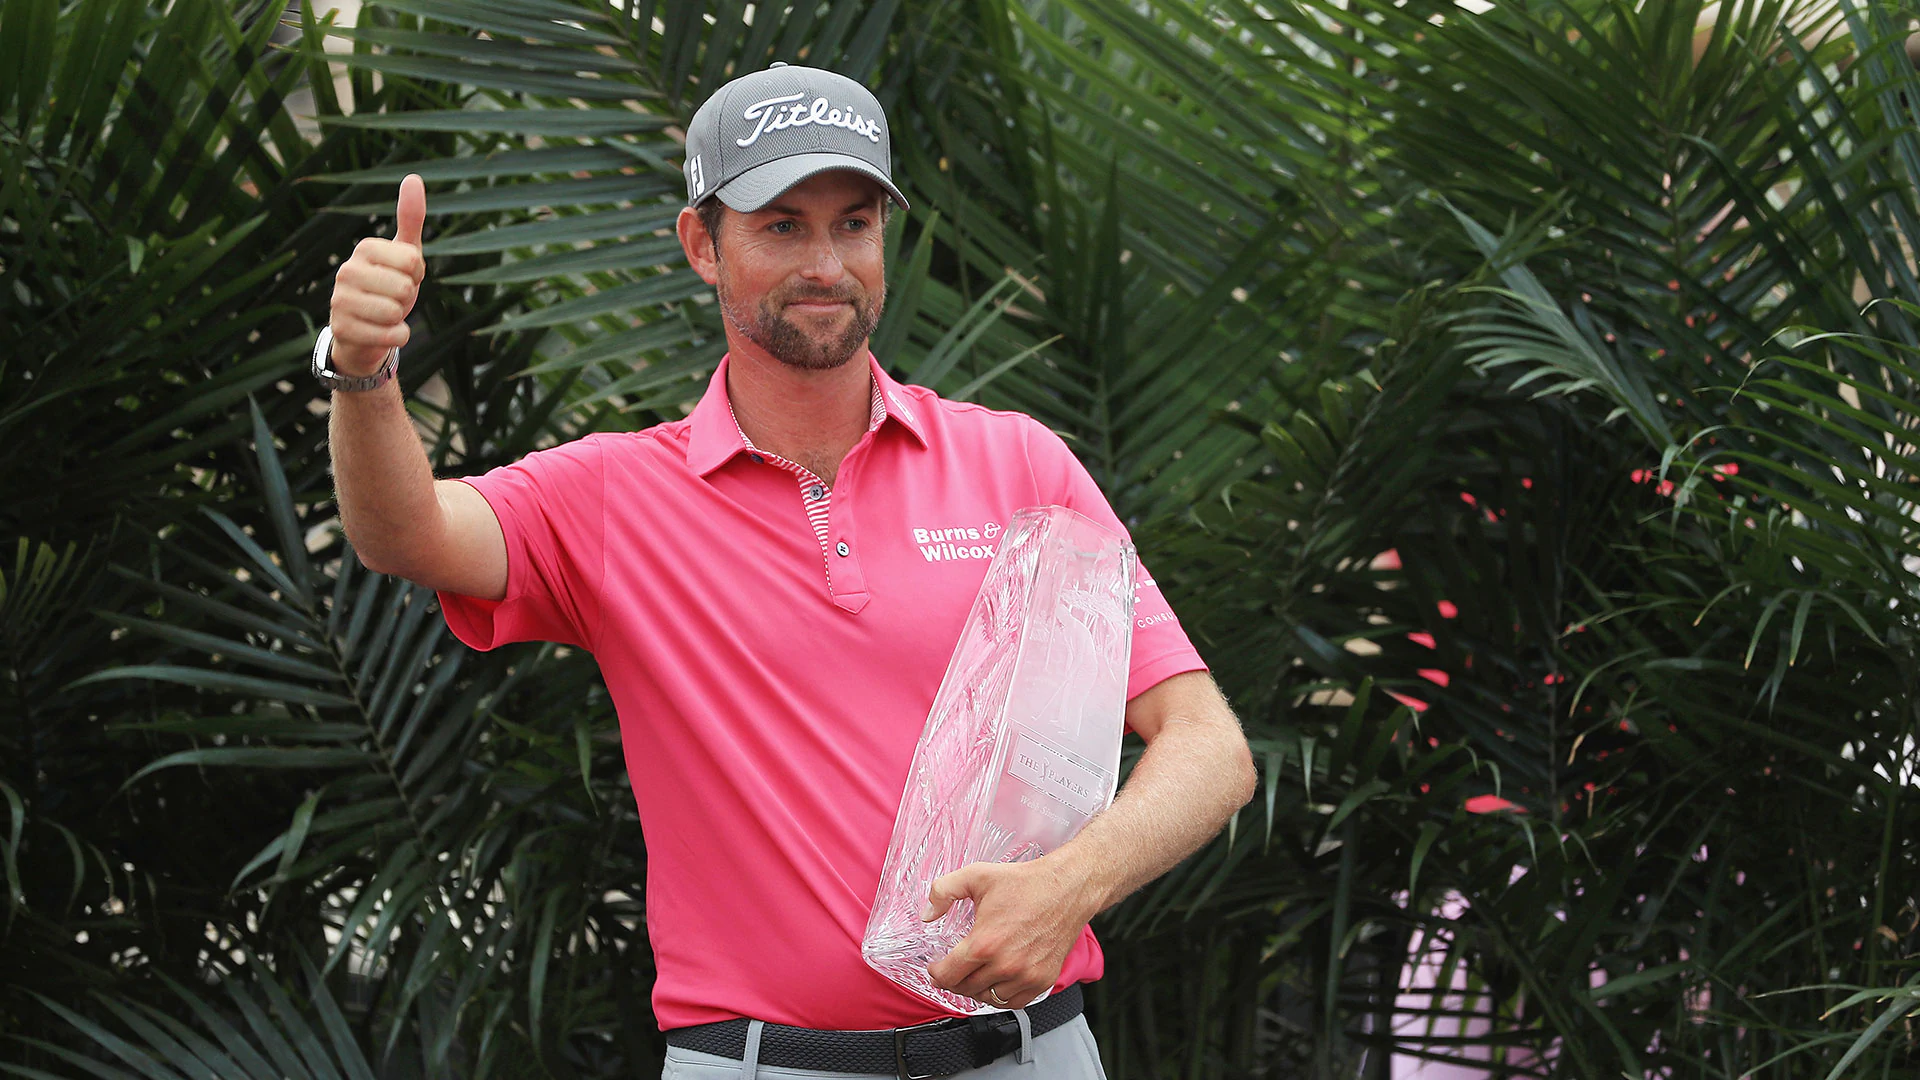 Simpson cruises to four-shot win at Players